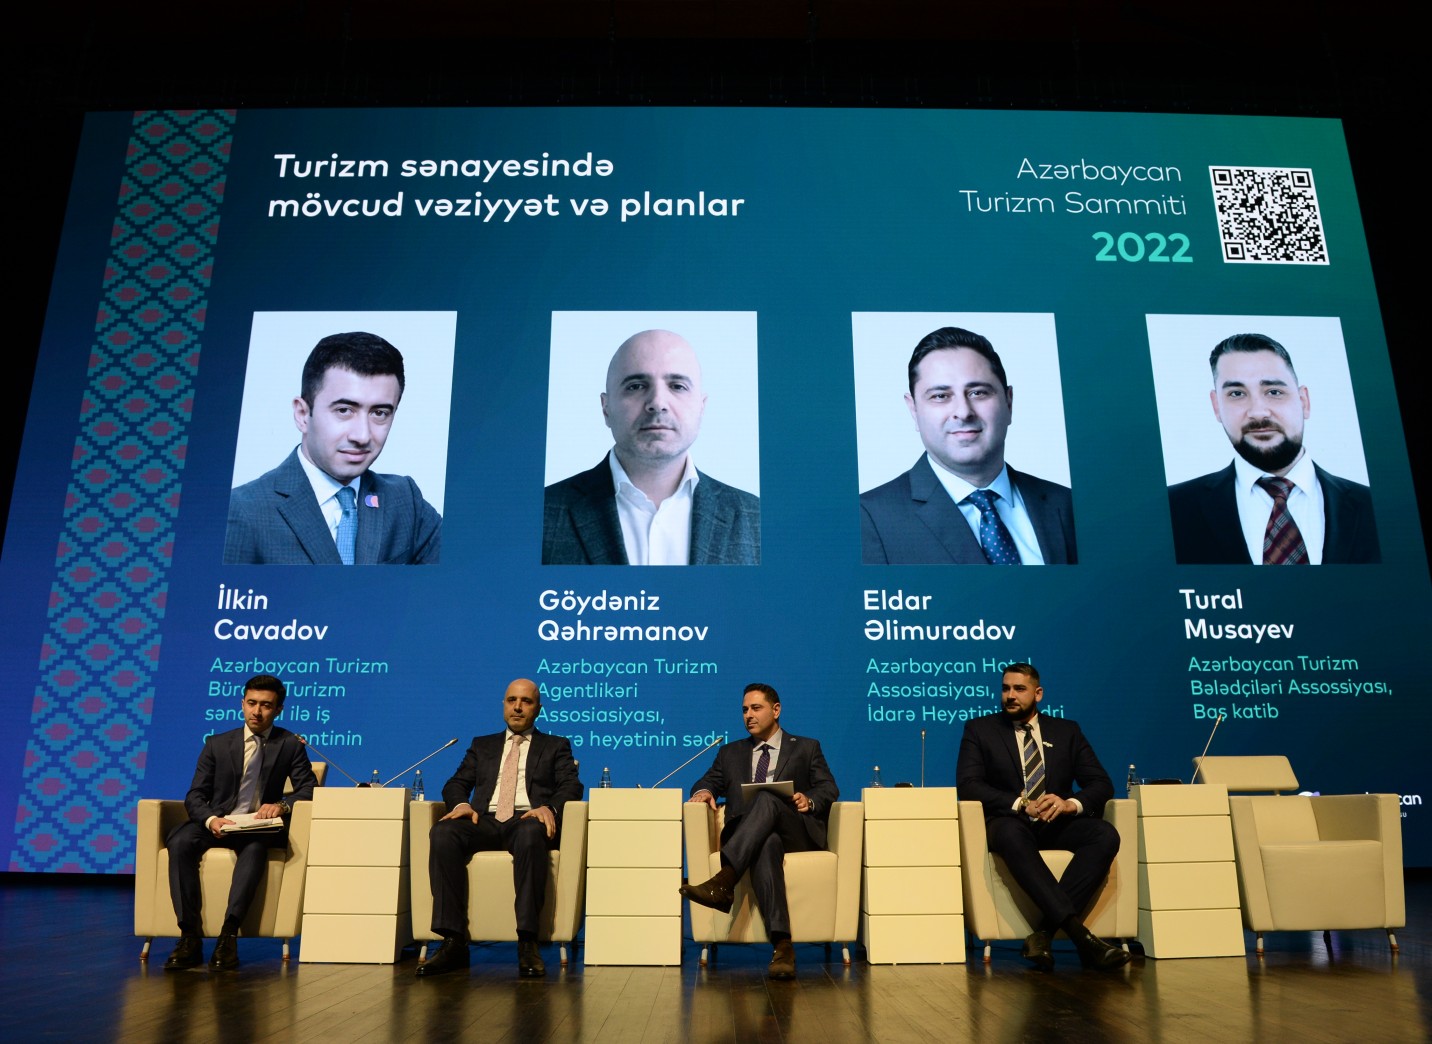 &quot;Azerbaijan Tourism Summit 2022&quot; was held at the Baku Convention Center.